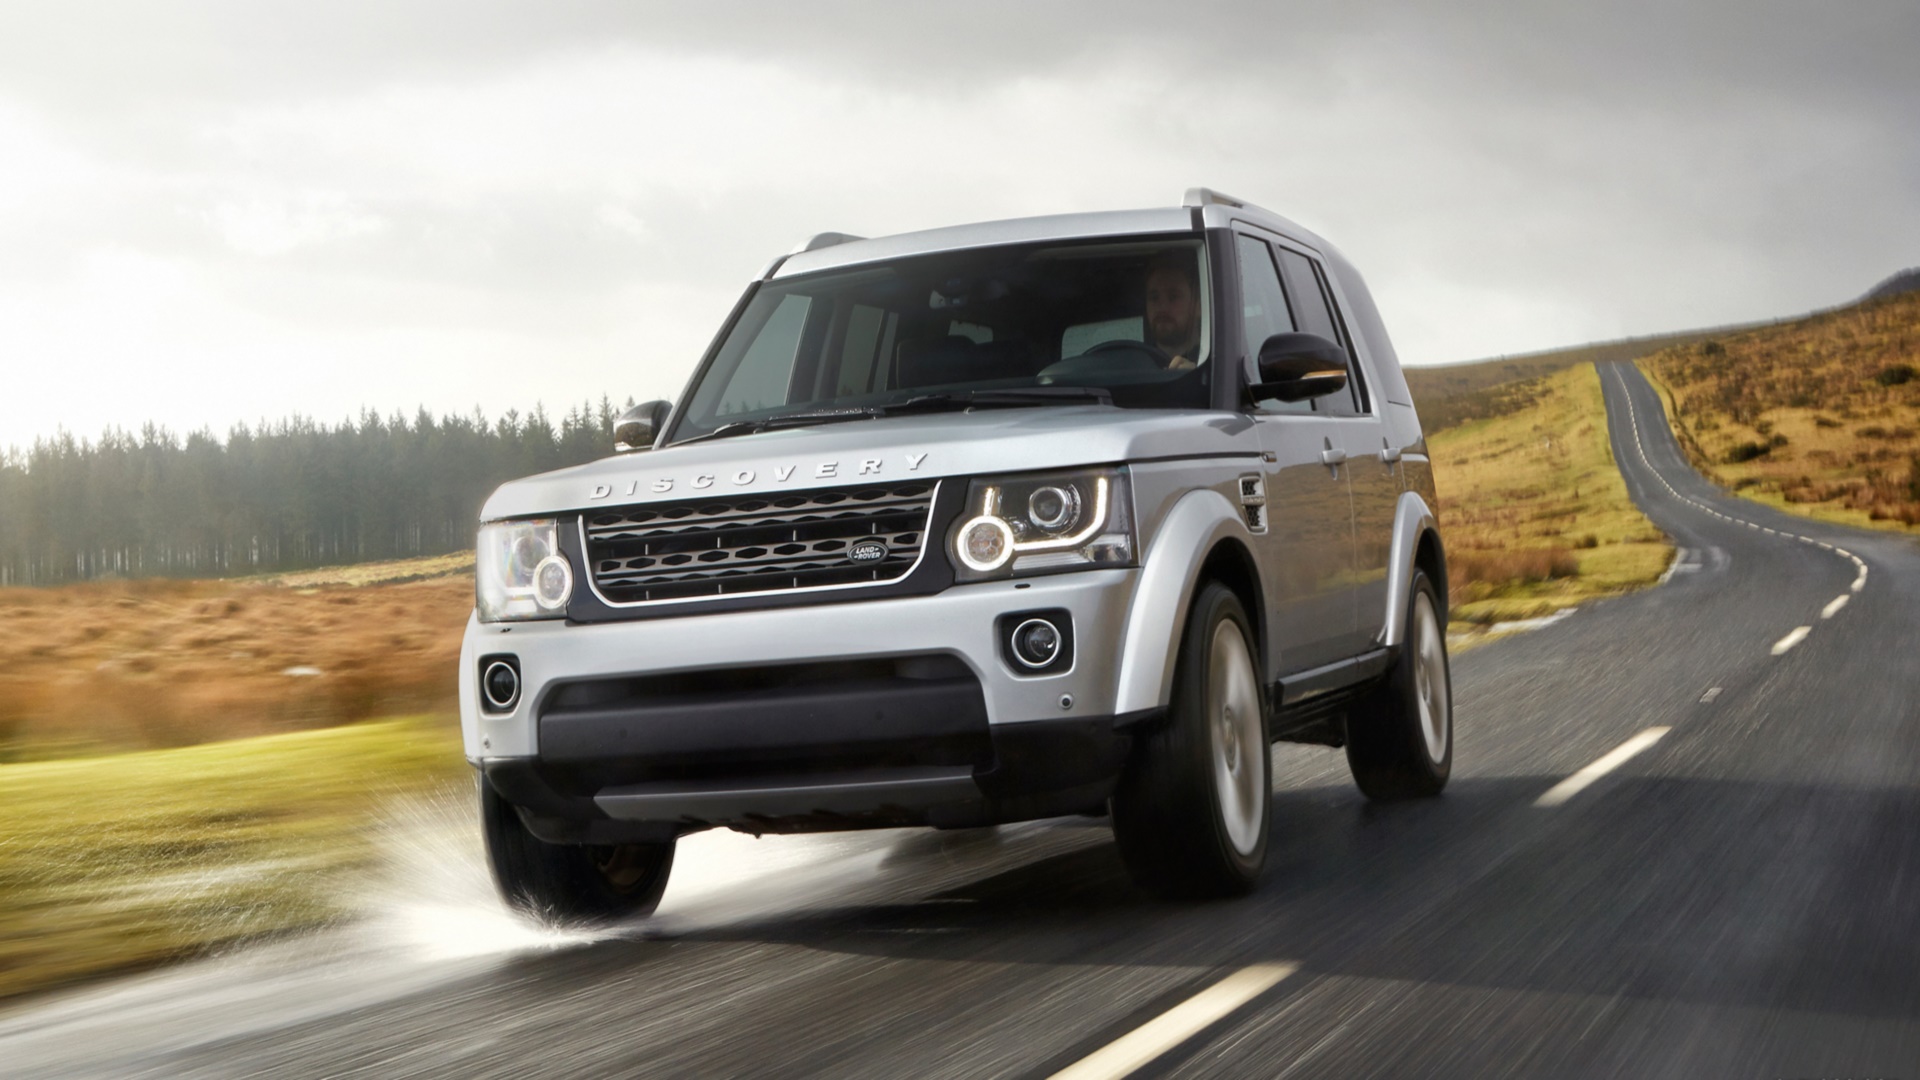 Land Rover Discovery XXV Full HD Wallpaper and Background | 1920x1080 ...
 2014 Land Rover Discovery Wallpaper